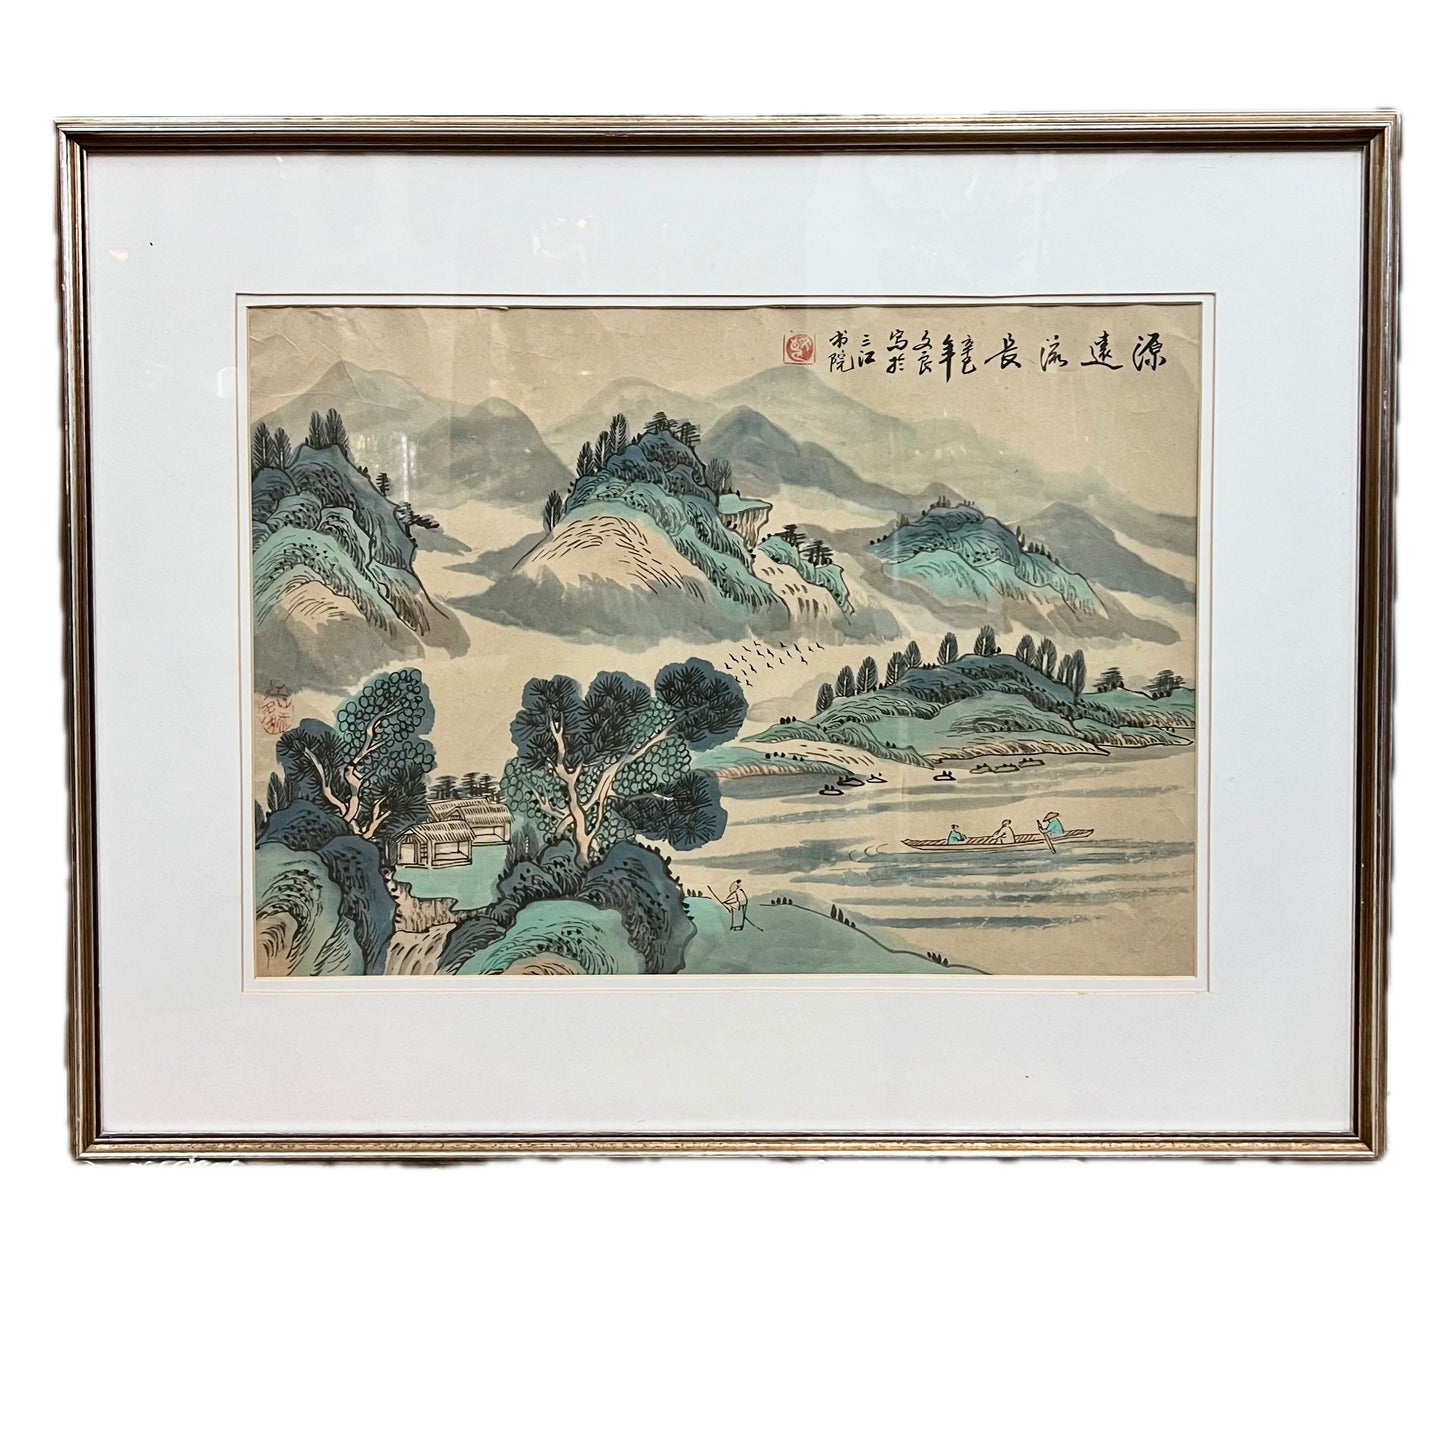 Fine Large Chinese Republic Period scholarly ink and watercolour landscape by 文良, "The River Runs Deep", 1940s